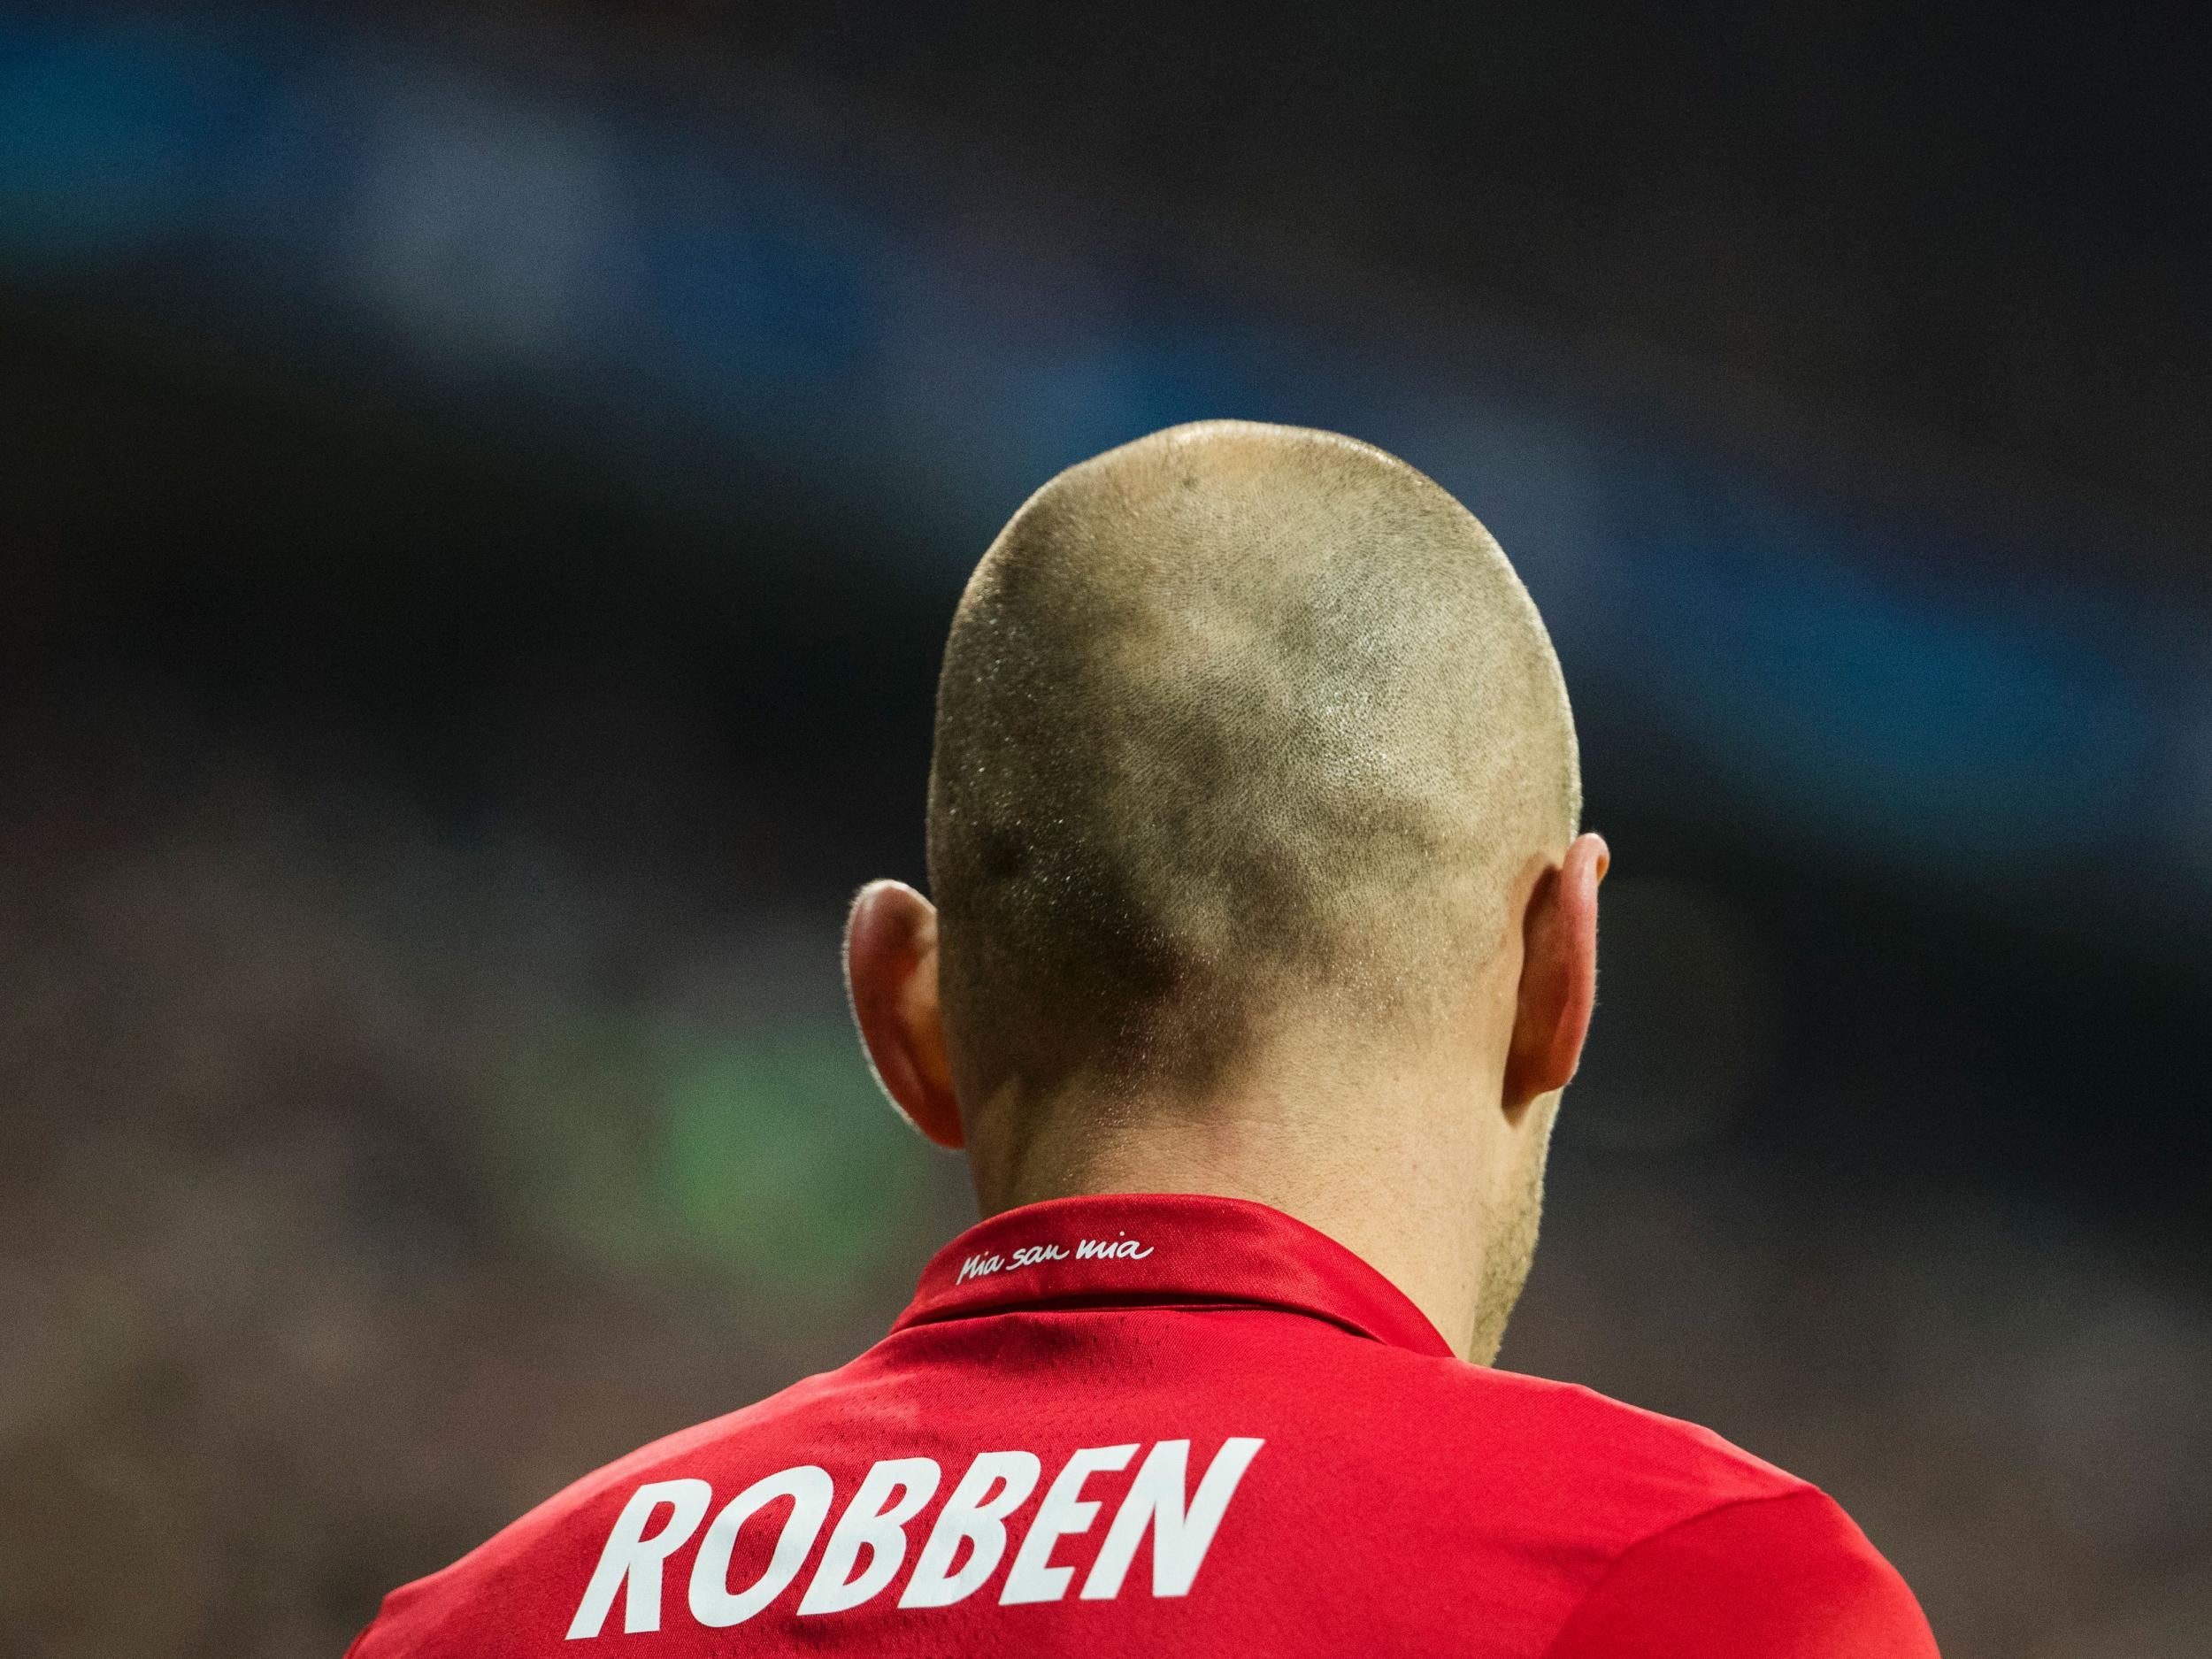 33-year-old Robben recently signed a one-year contract extension